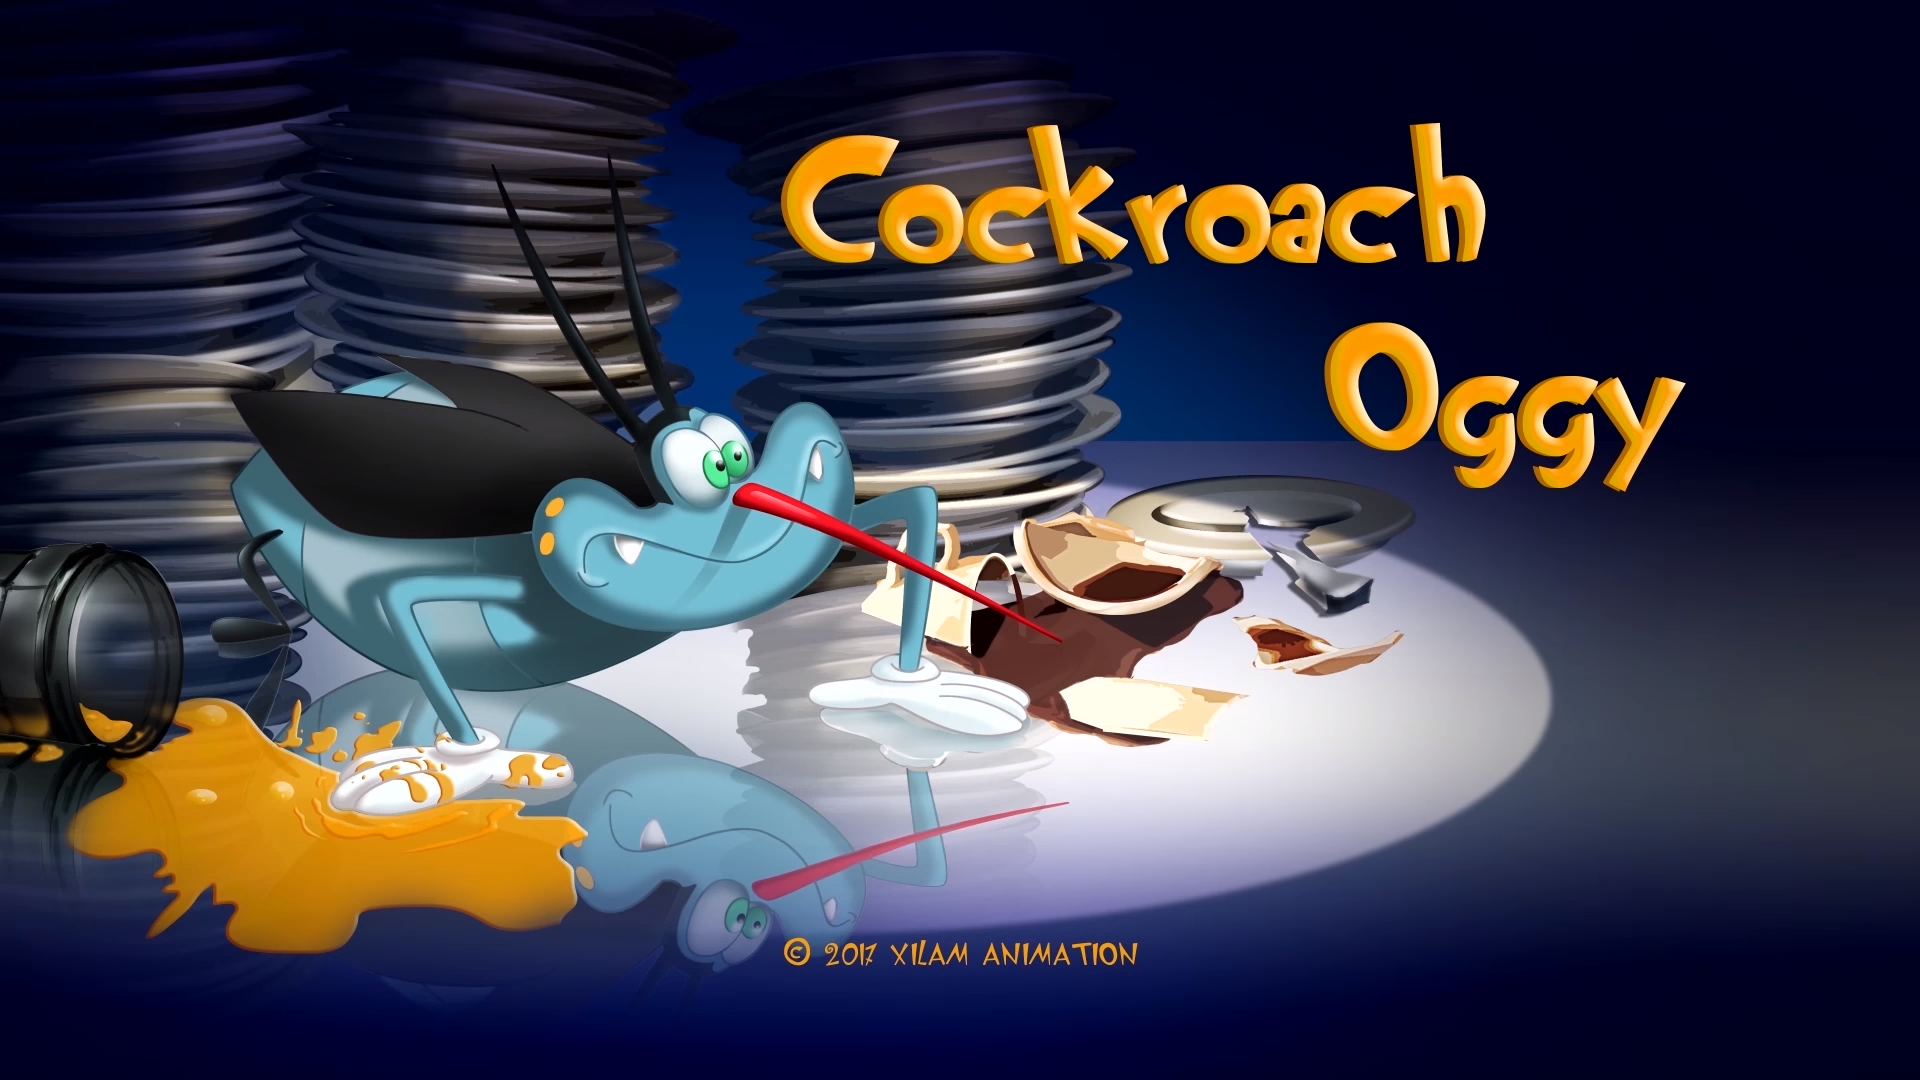 oggy and the cockroaches episode